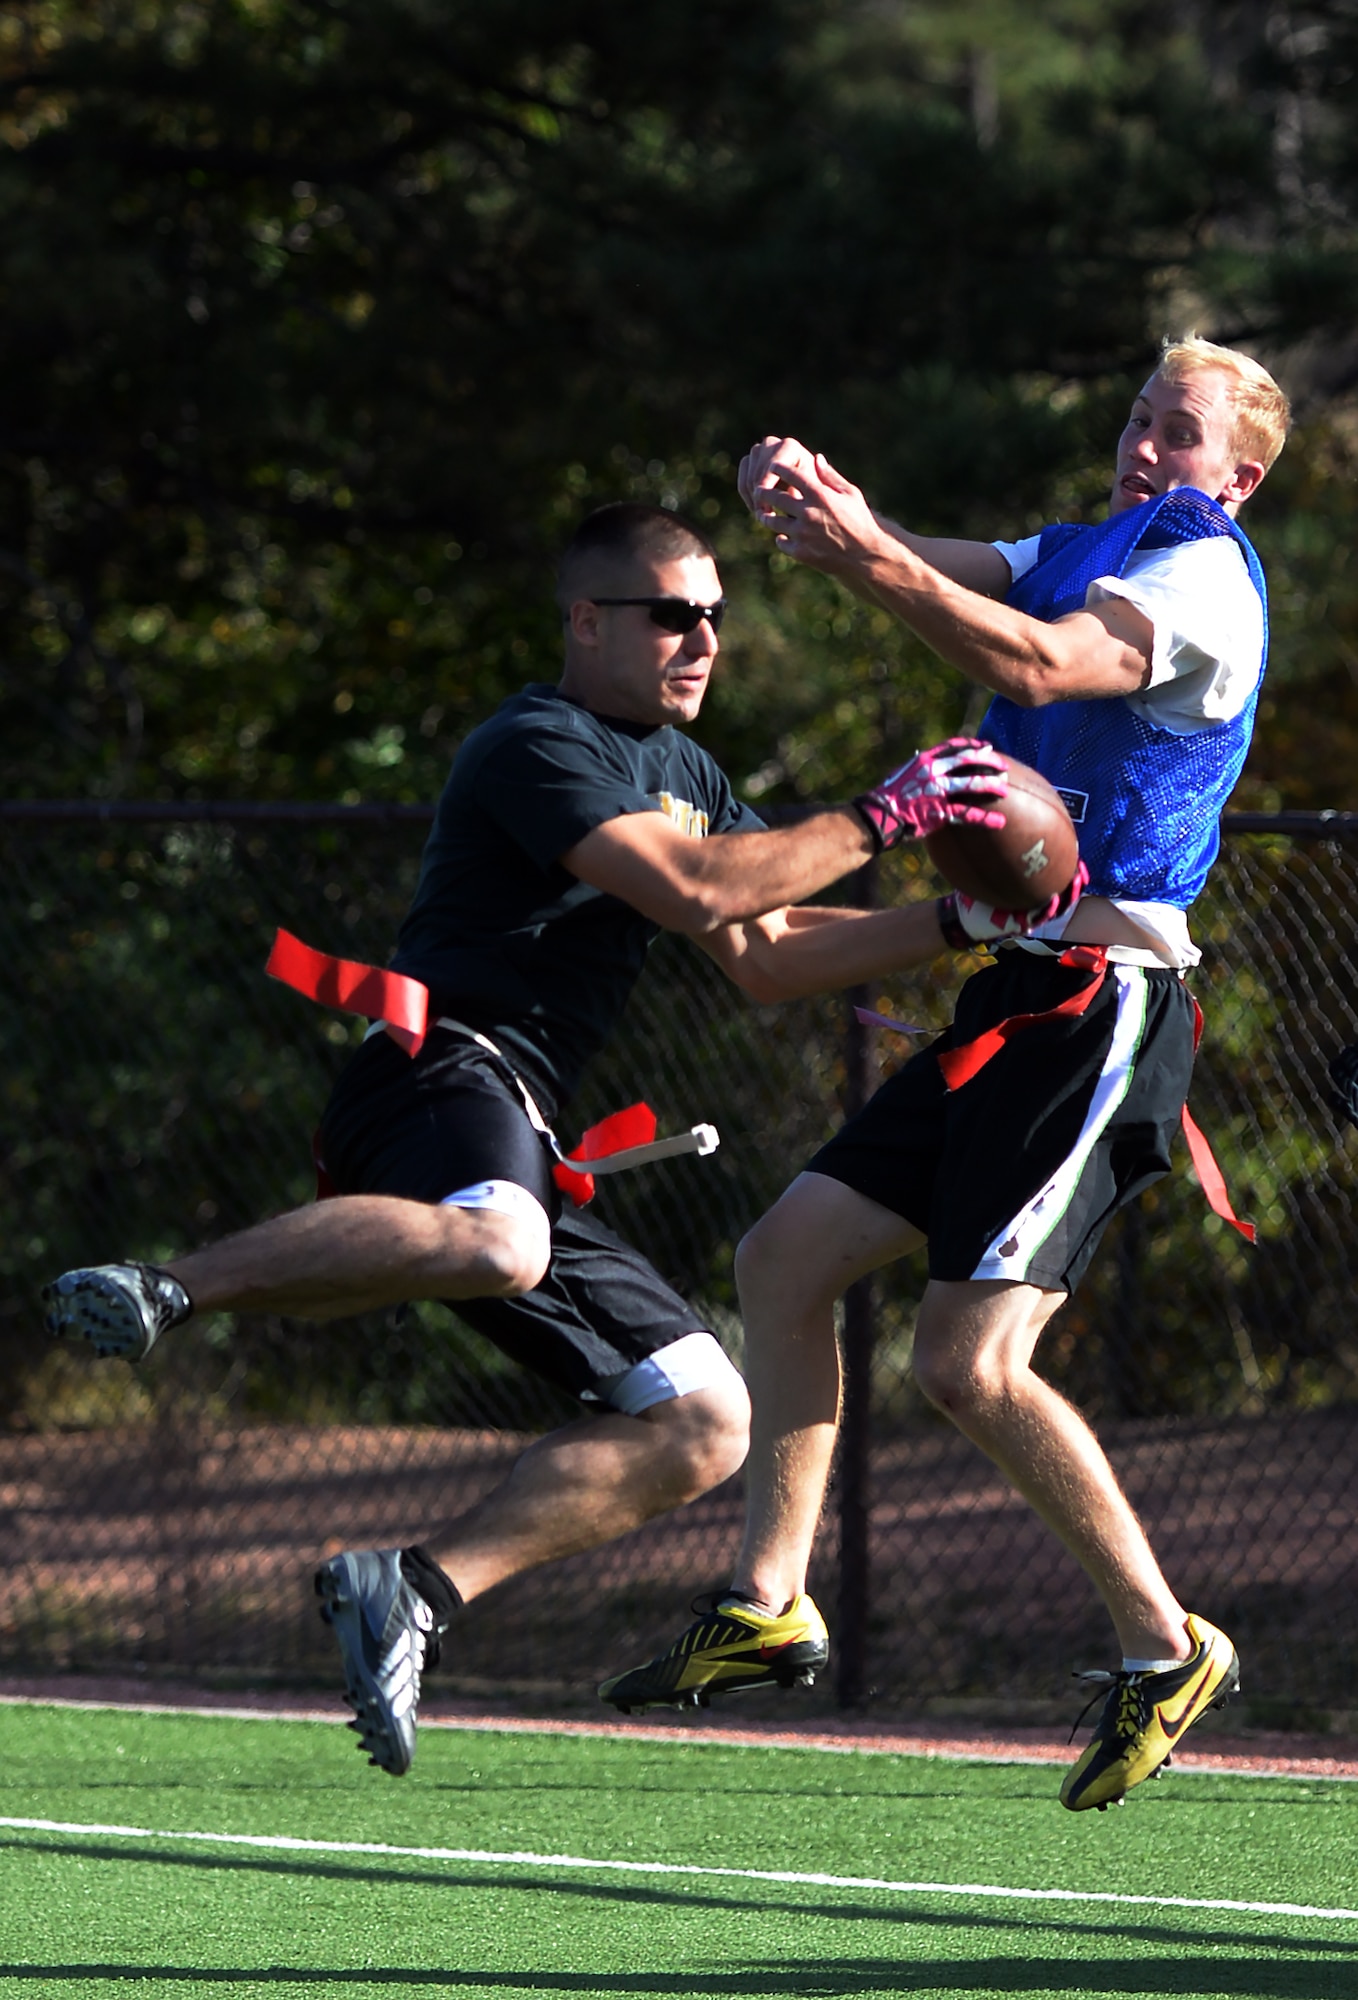 Nicolas Sisco, 90th Missile Maintenance Squadron Electro-Mechanical Team technician, intercepts a pass intended for a receiver from the U.S. Air Force Academy, Colo., Oct. 17, 2015, during a flag football game at the Air Force Academy. Warren won the game to move on to the championship. (U.S. Air Force photo by Senior Airman Brandon Valle)